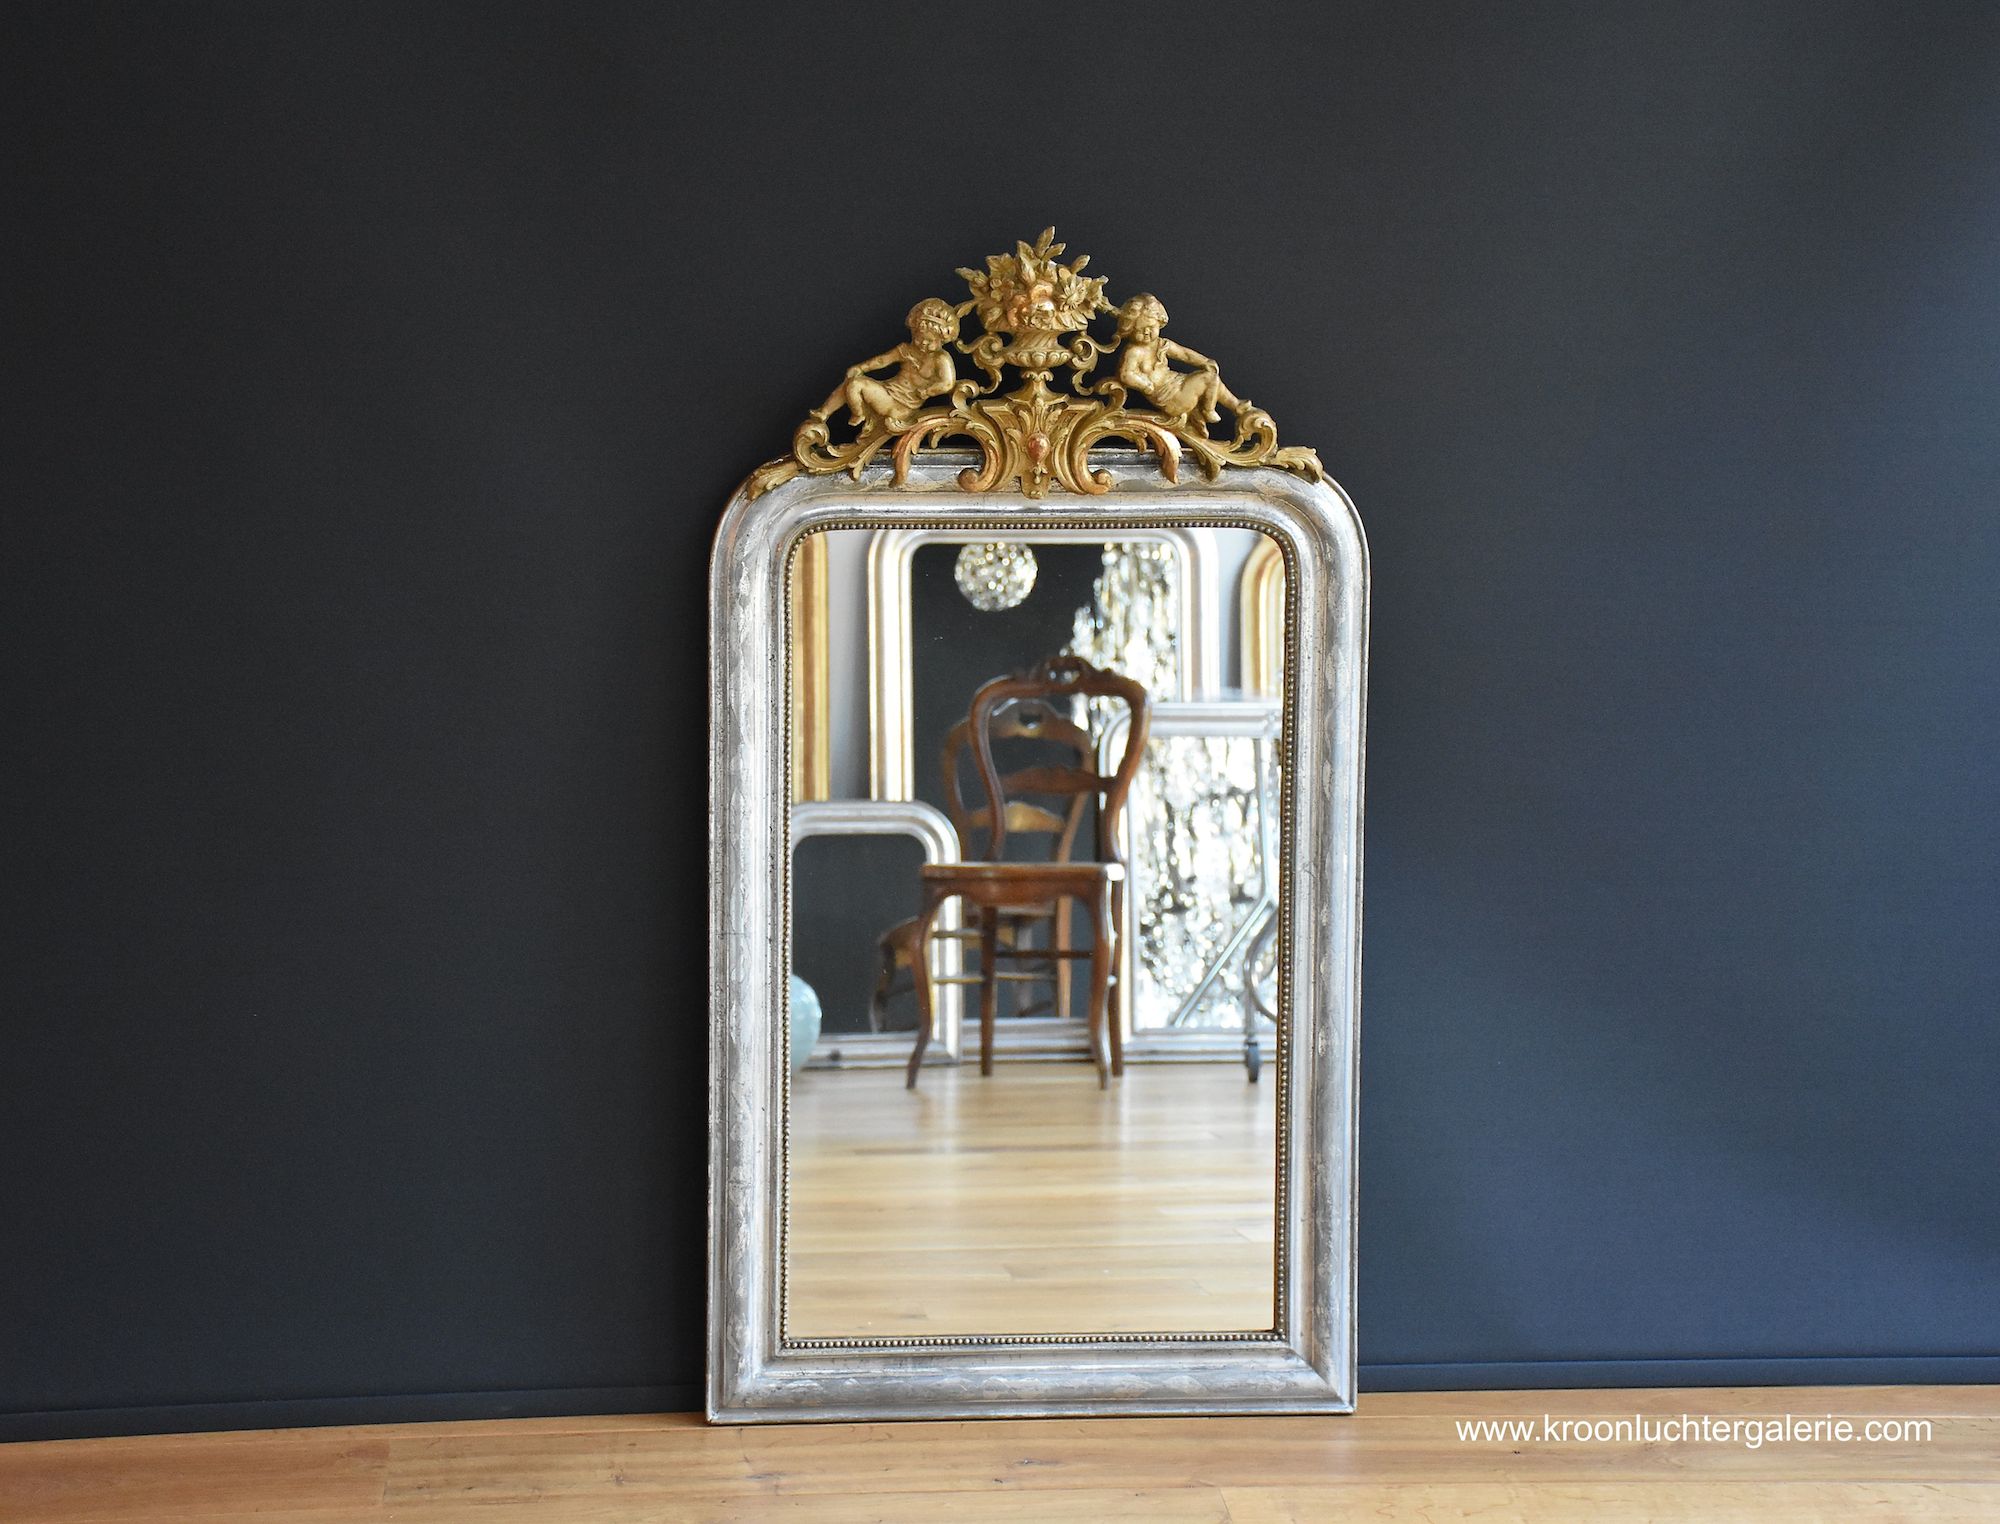 Silvered French mirror with a crest